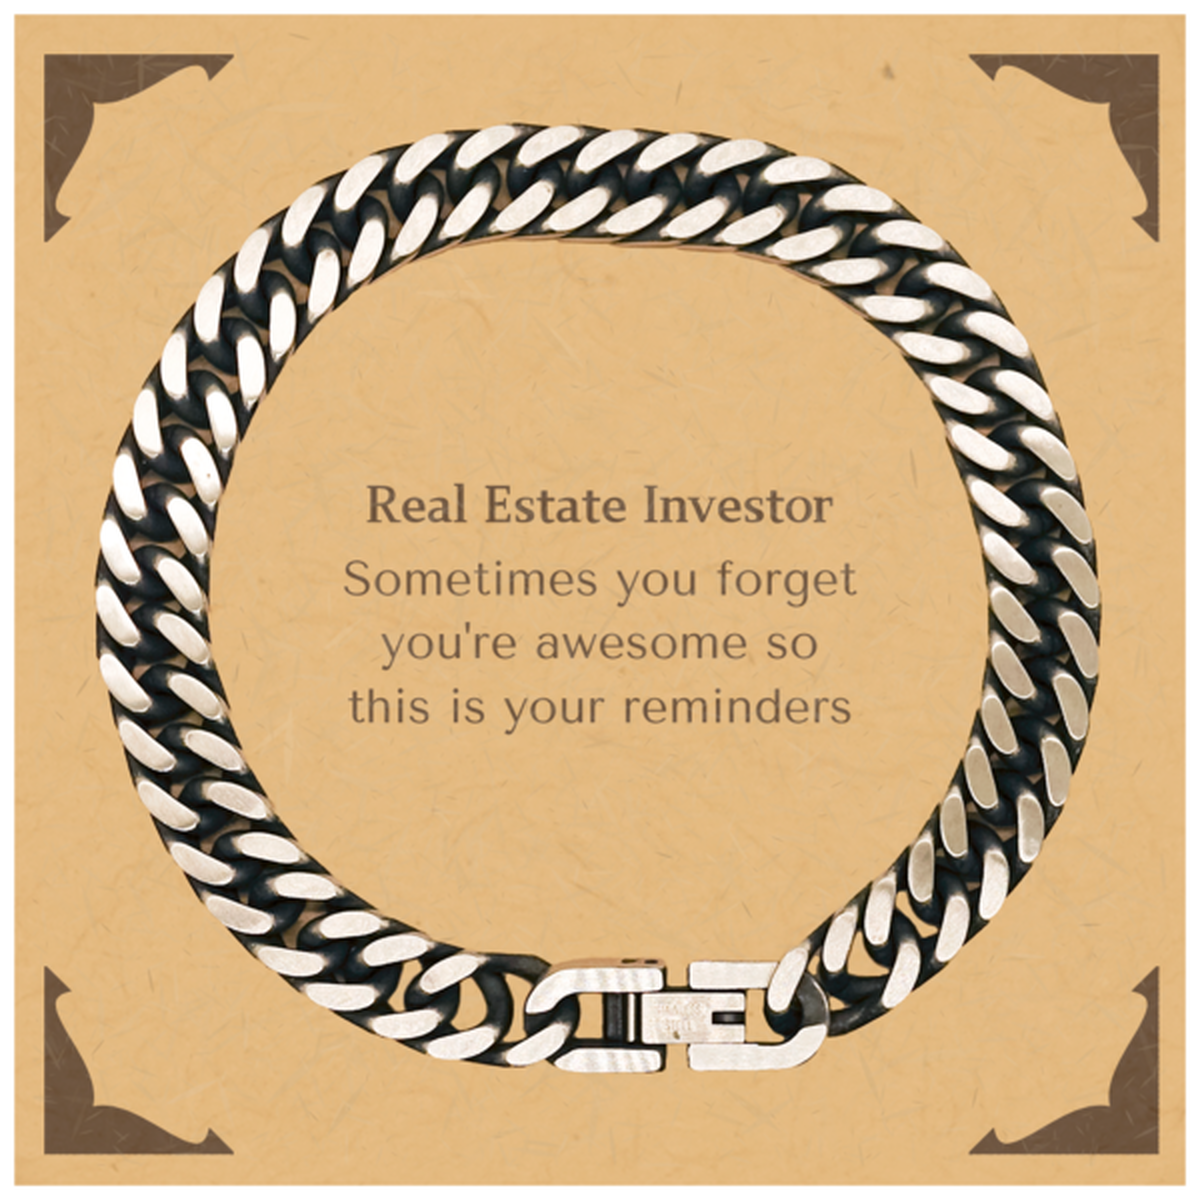 Sentimental Real Estate Investor Cuban Link Chain Bracelet, Real Estate Investor Sometimes you forget you're awesome so this is your reminders, Graduation Christmas Birthday Gifts for Real Estate Investor, Men, Women, Coworkers